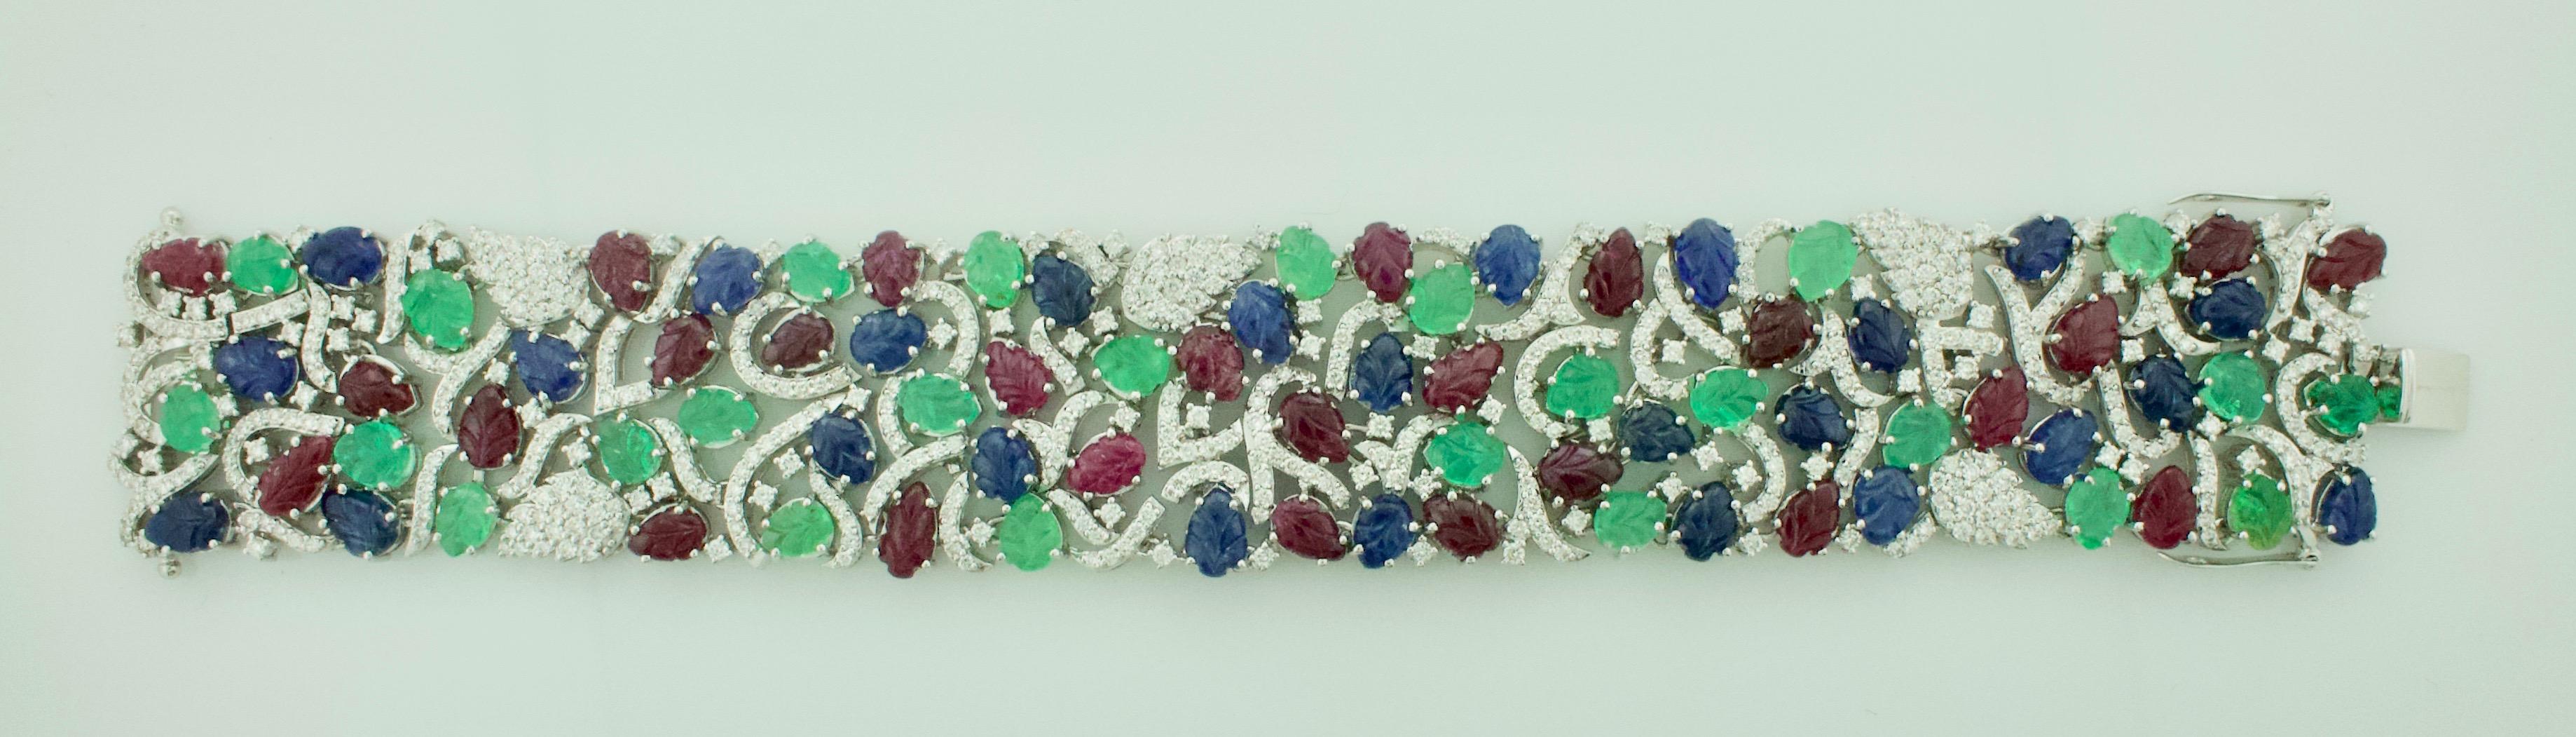 Emerald, Ruby and Sapphire Diamond Bracelet 18 Karat Wide
Discover the Allure of Timeless Elegance with the 18K White Gold Diamond/Sapphire, Ruby & Emerald 